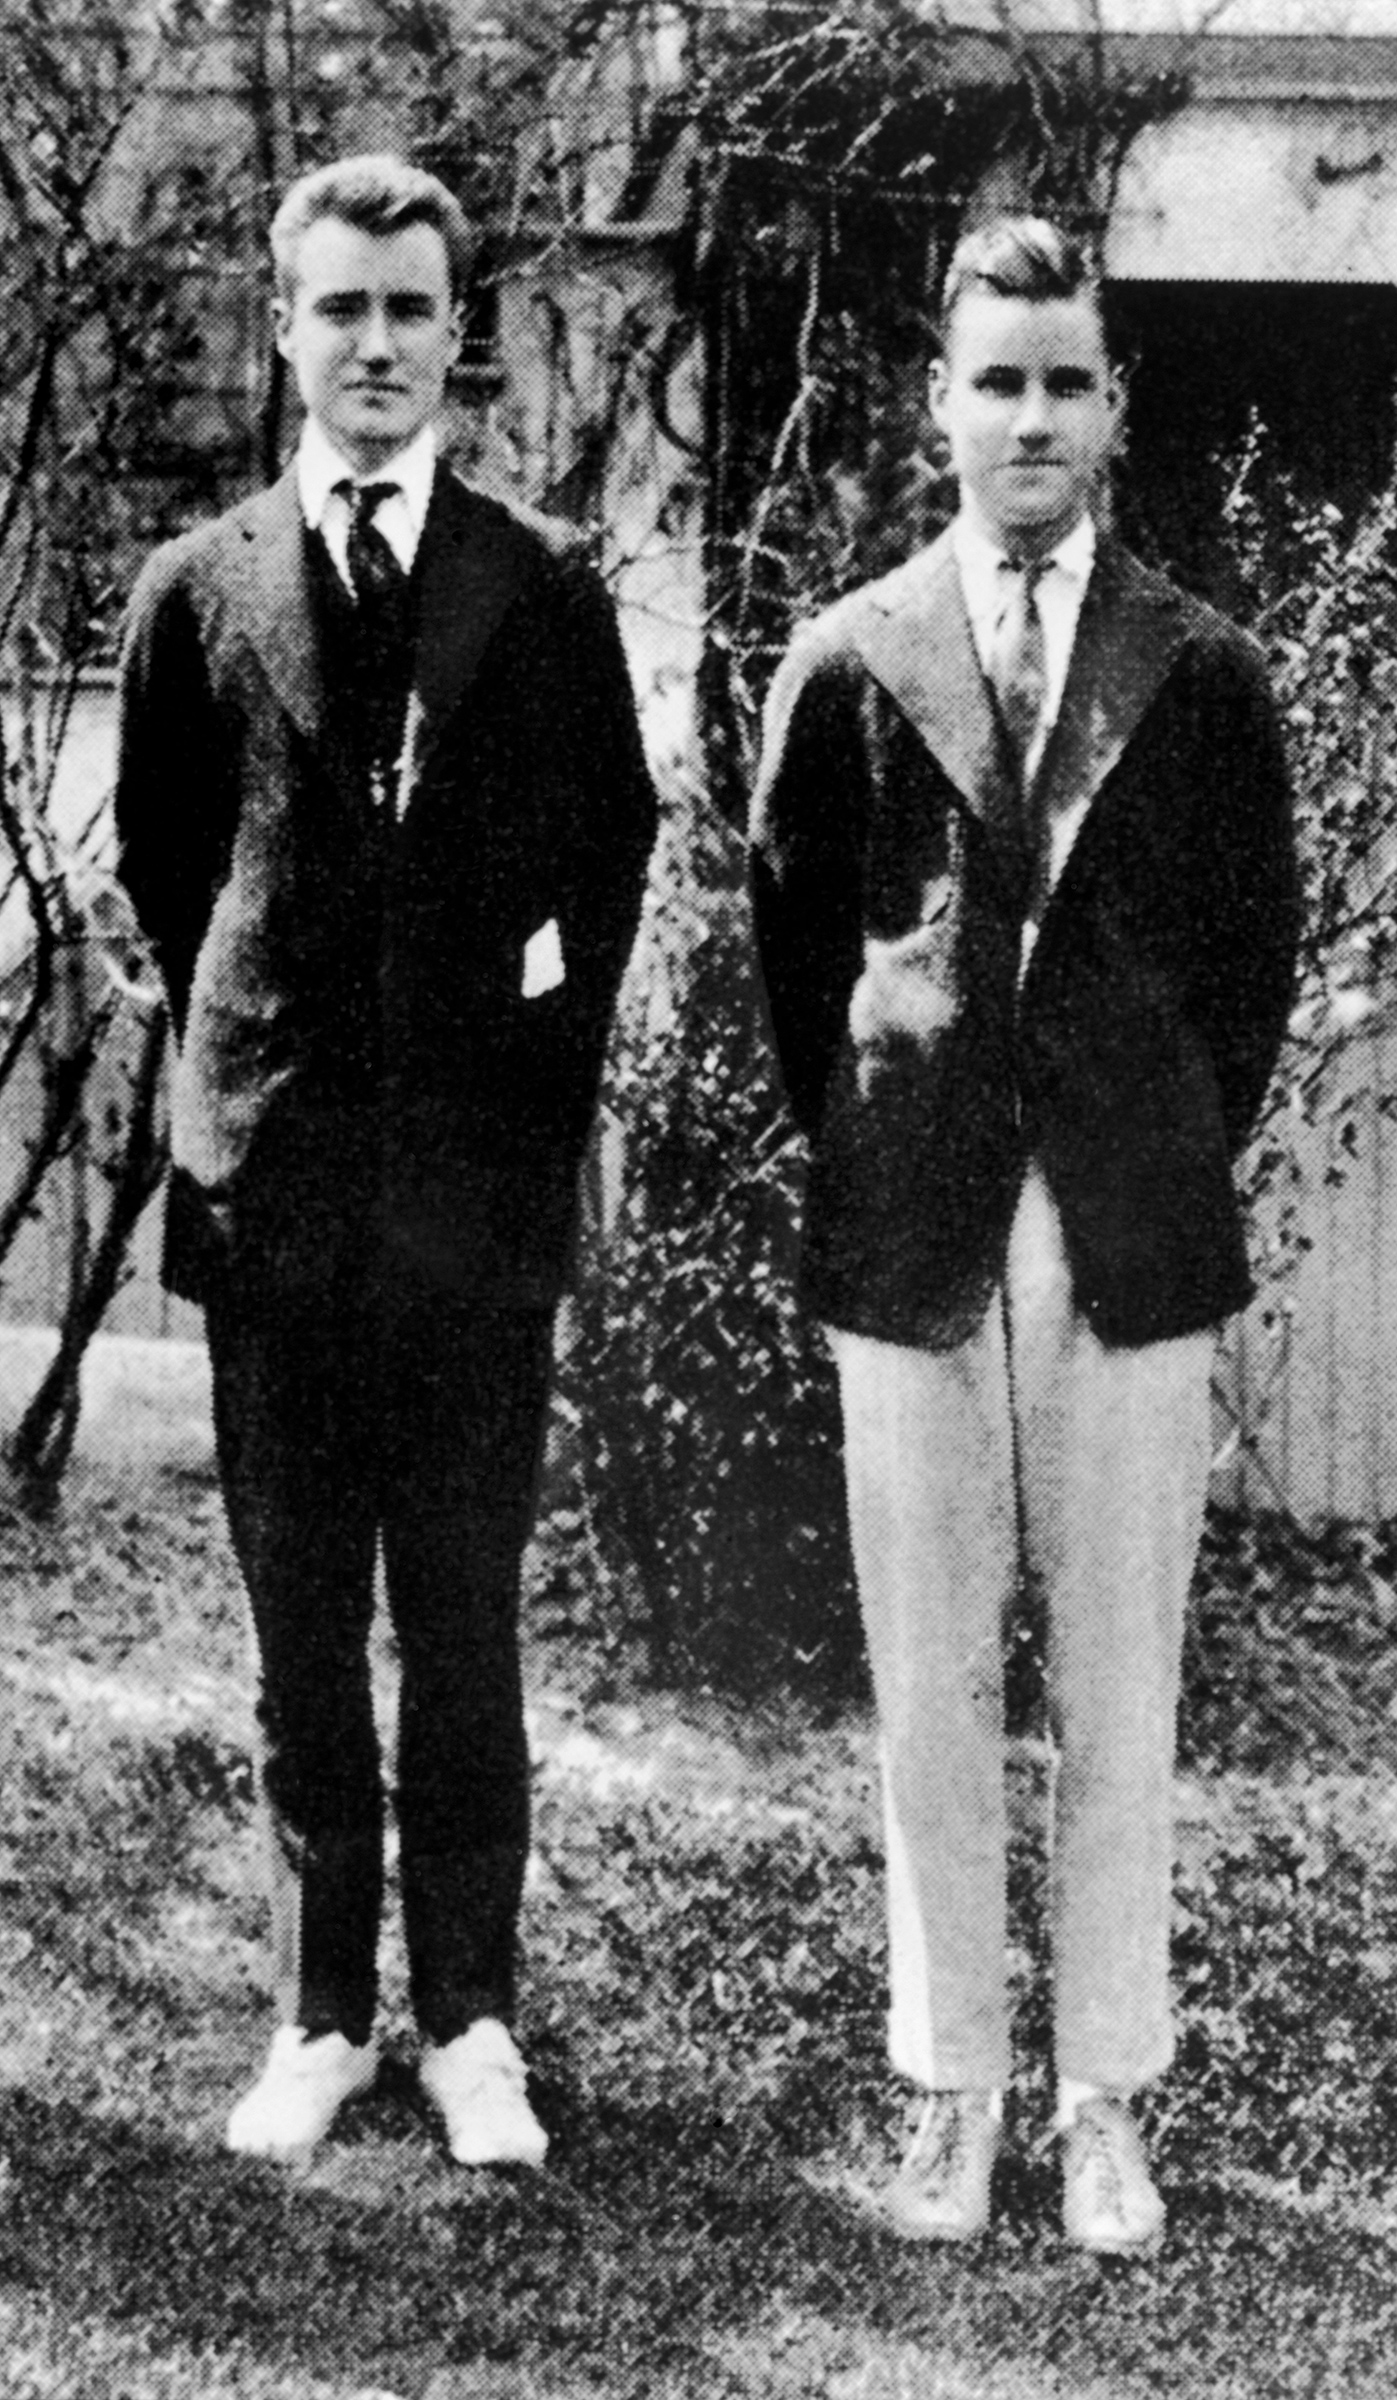 The future co-founders of TIME, Henry Luce (left) and Briton Hadden (right), at Hotchkiss Prepatory School in Lakeville, Conn., in 1916. (The LIFE Picture Collection/Shutterstock)